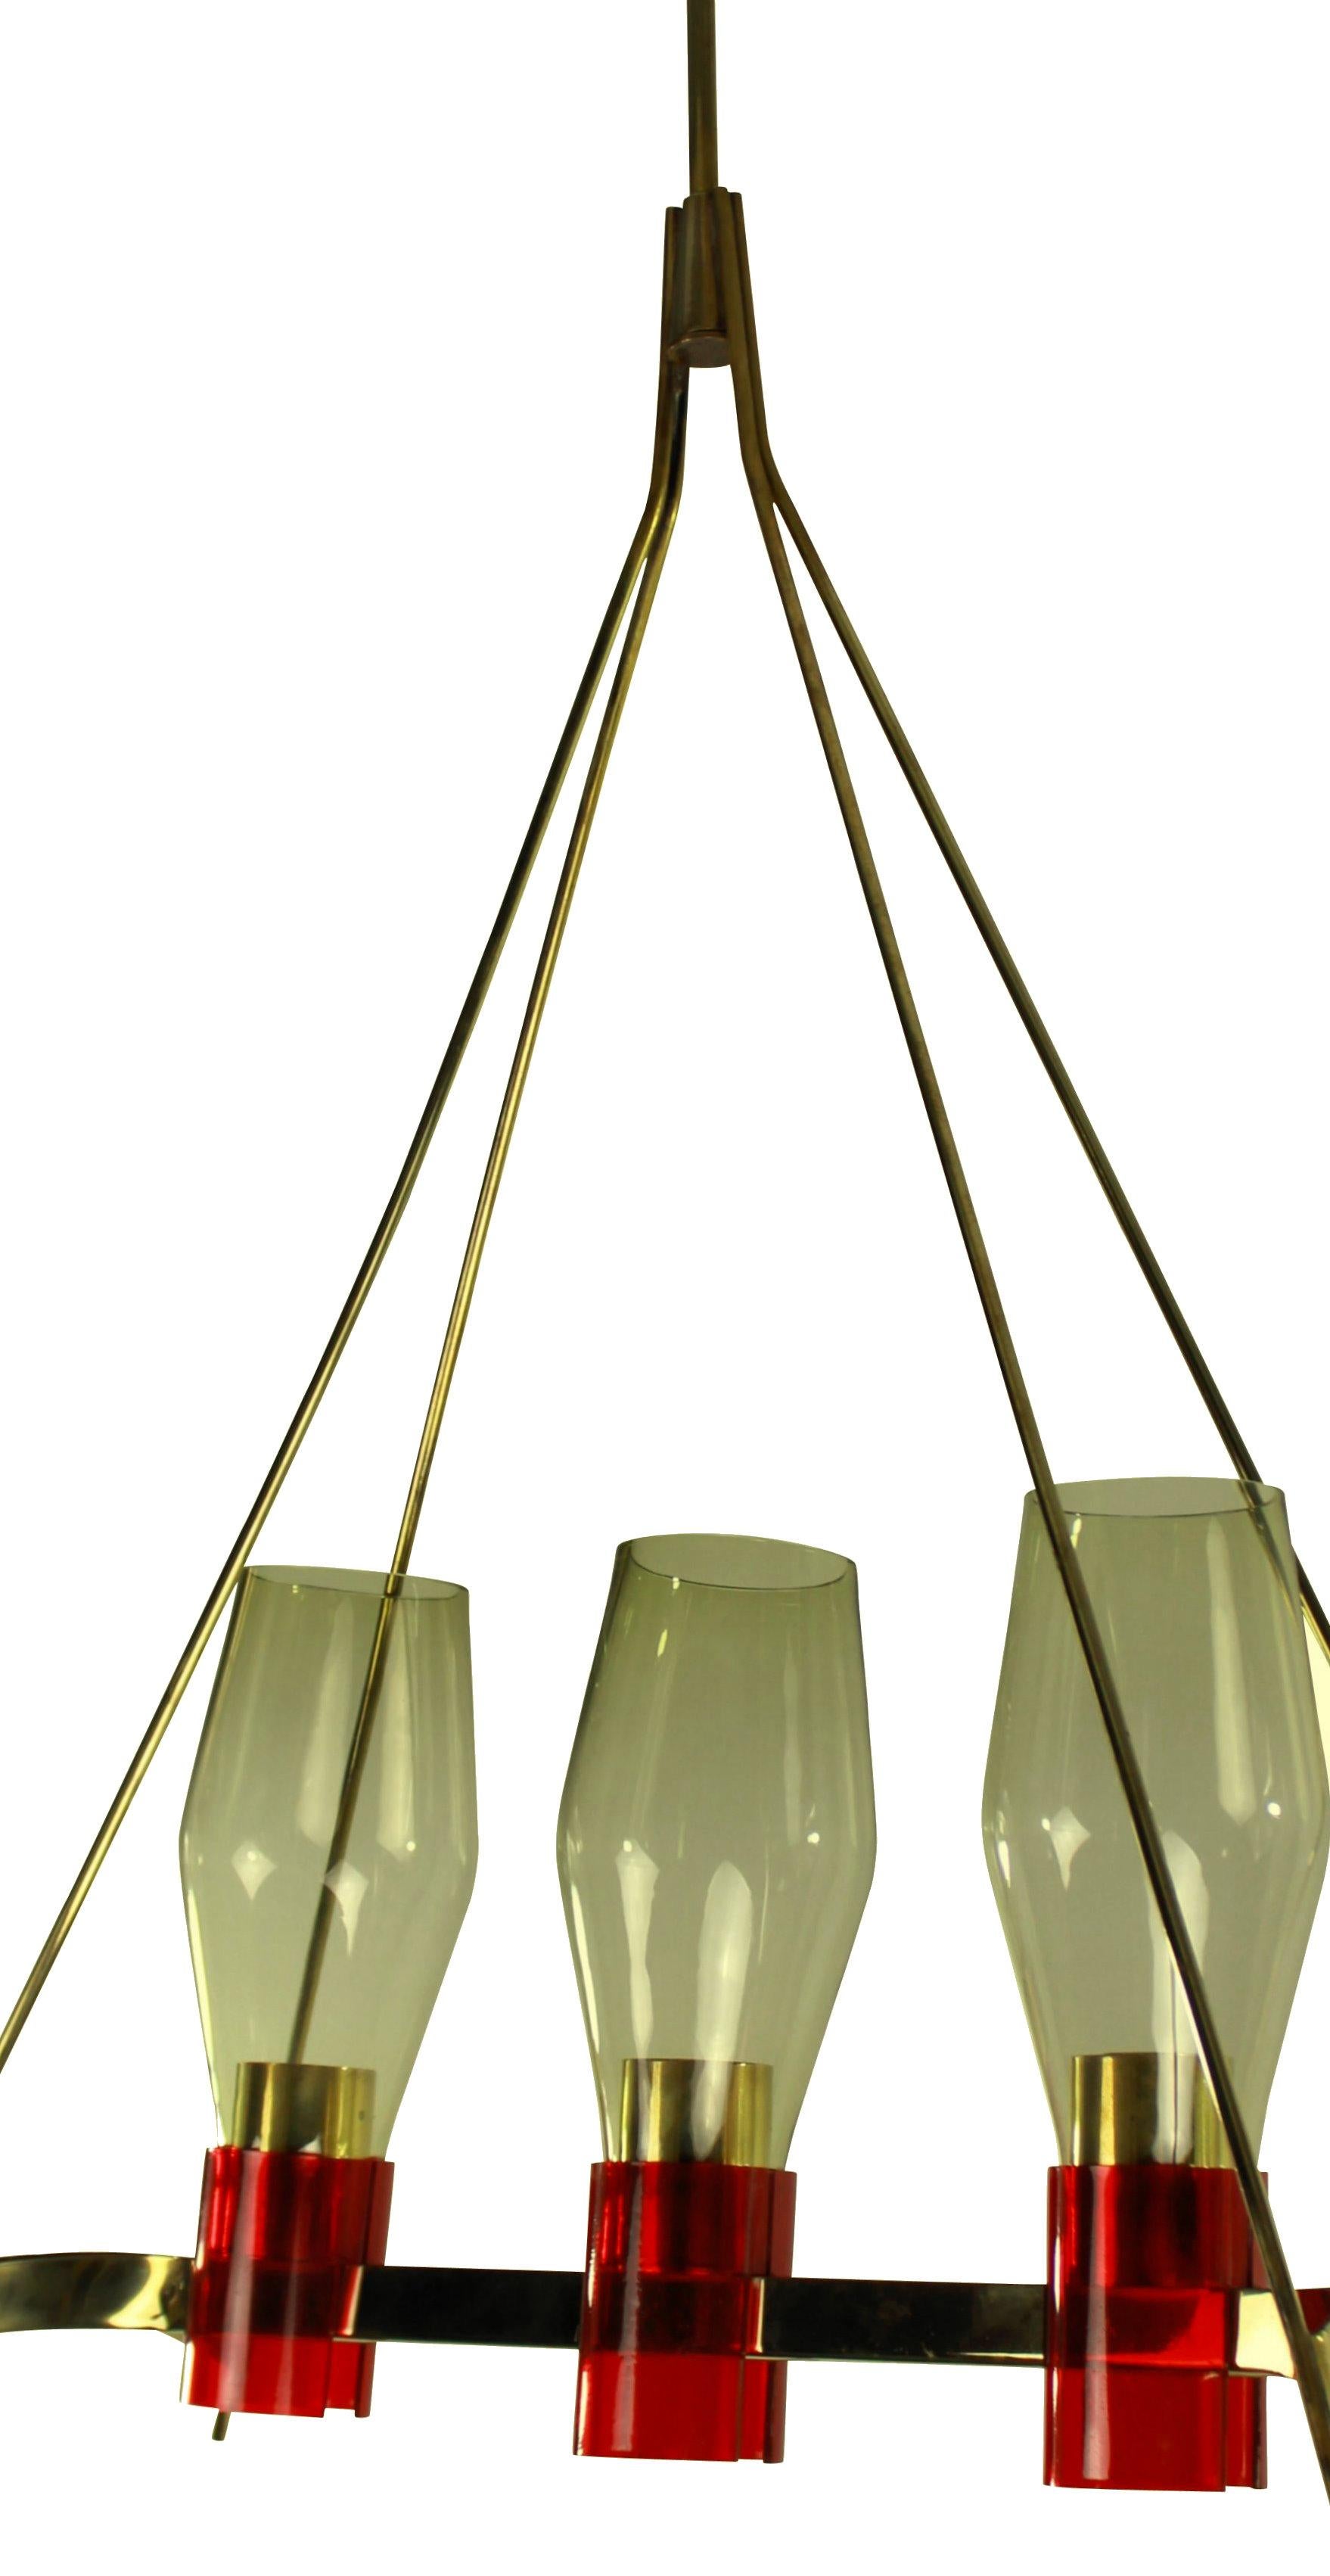 An Italian hanging light of unusual design, in brass with red detailing and pale yellow glass shades.

